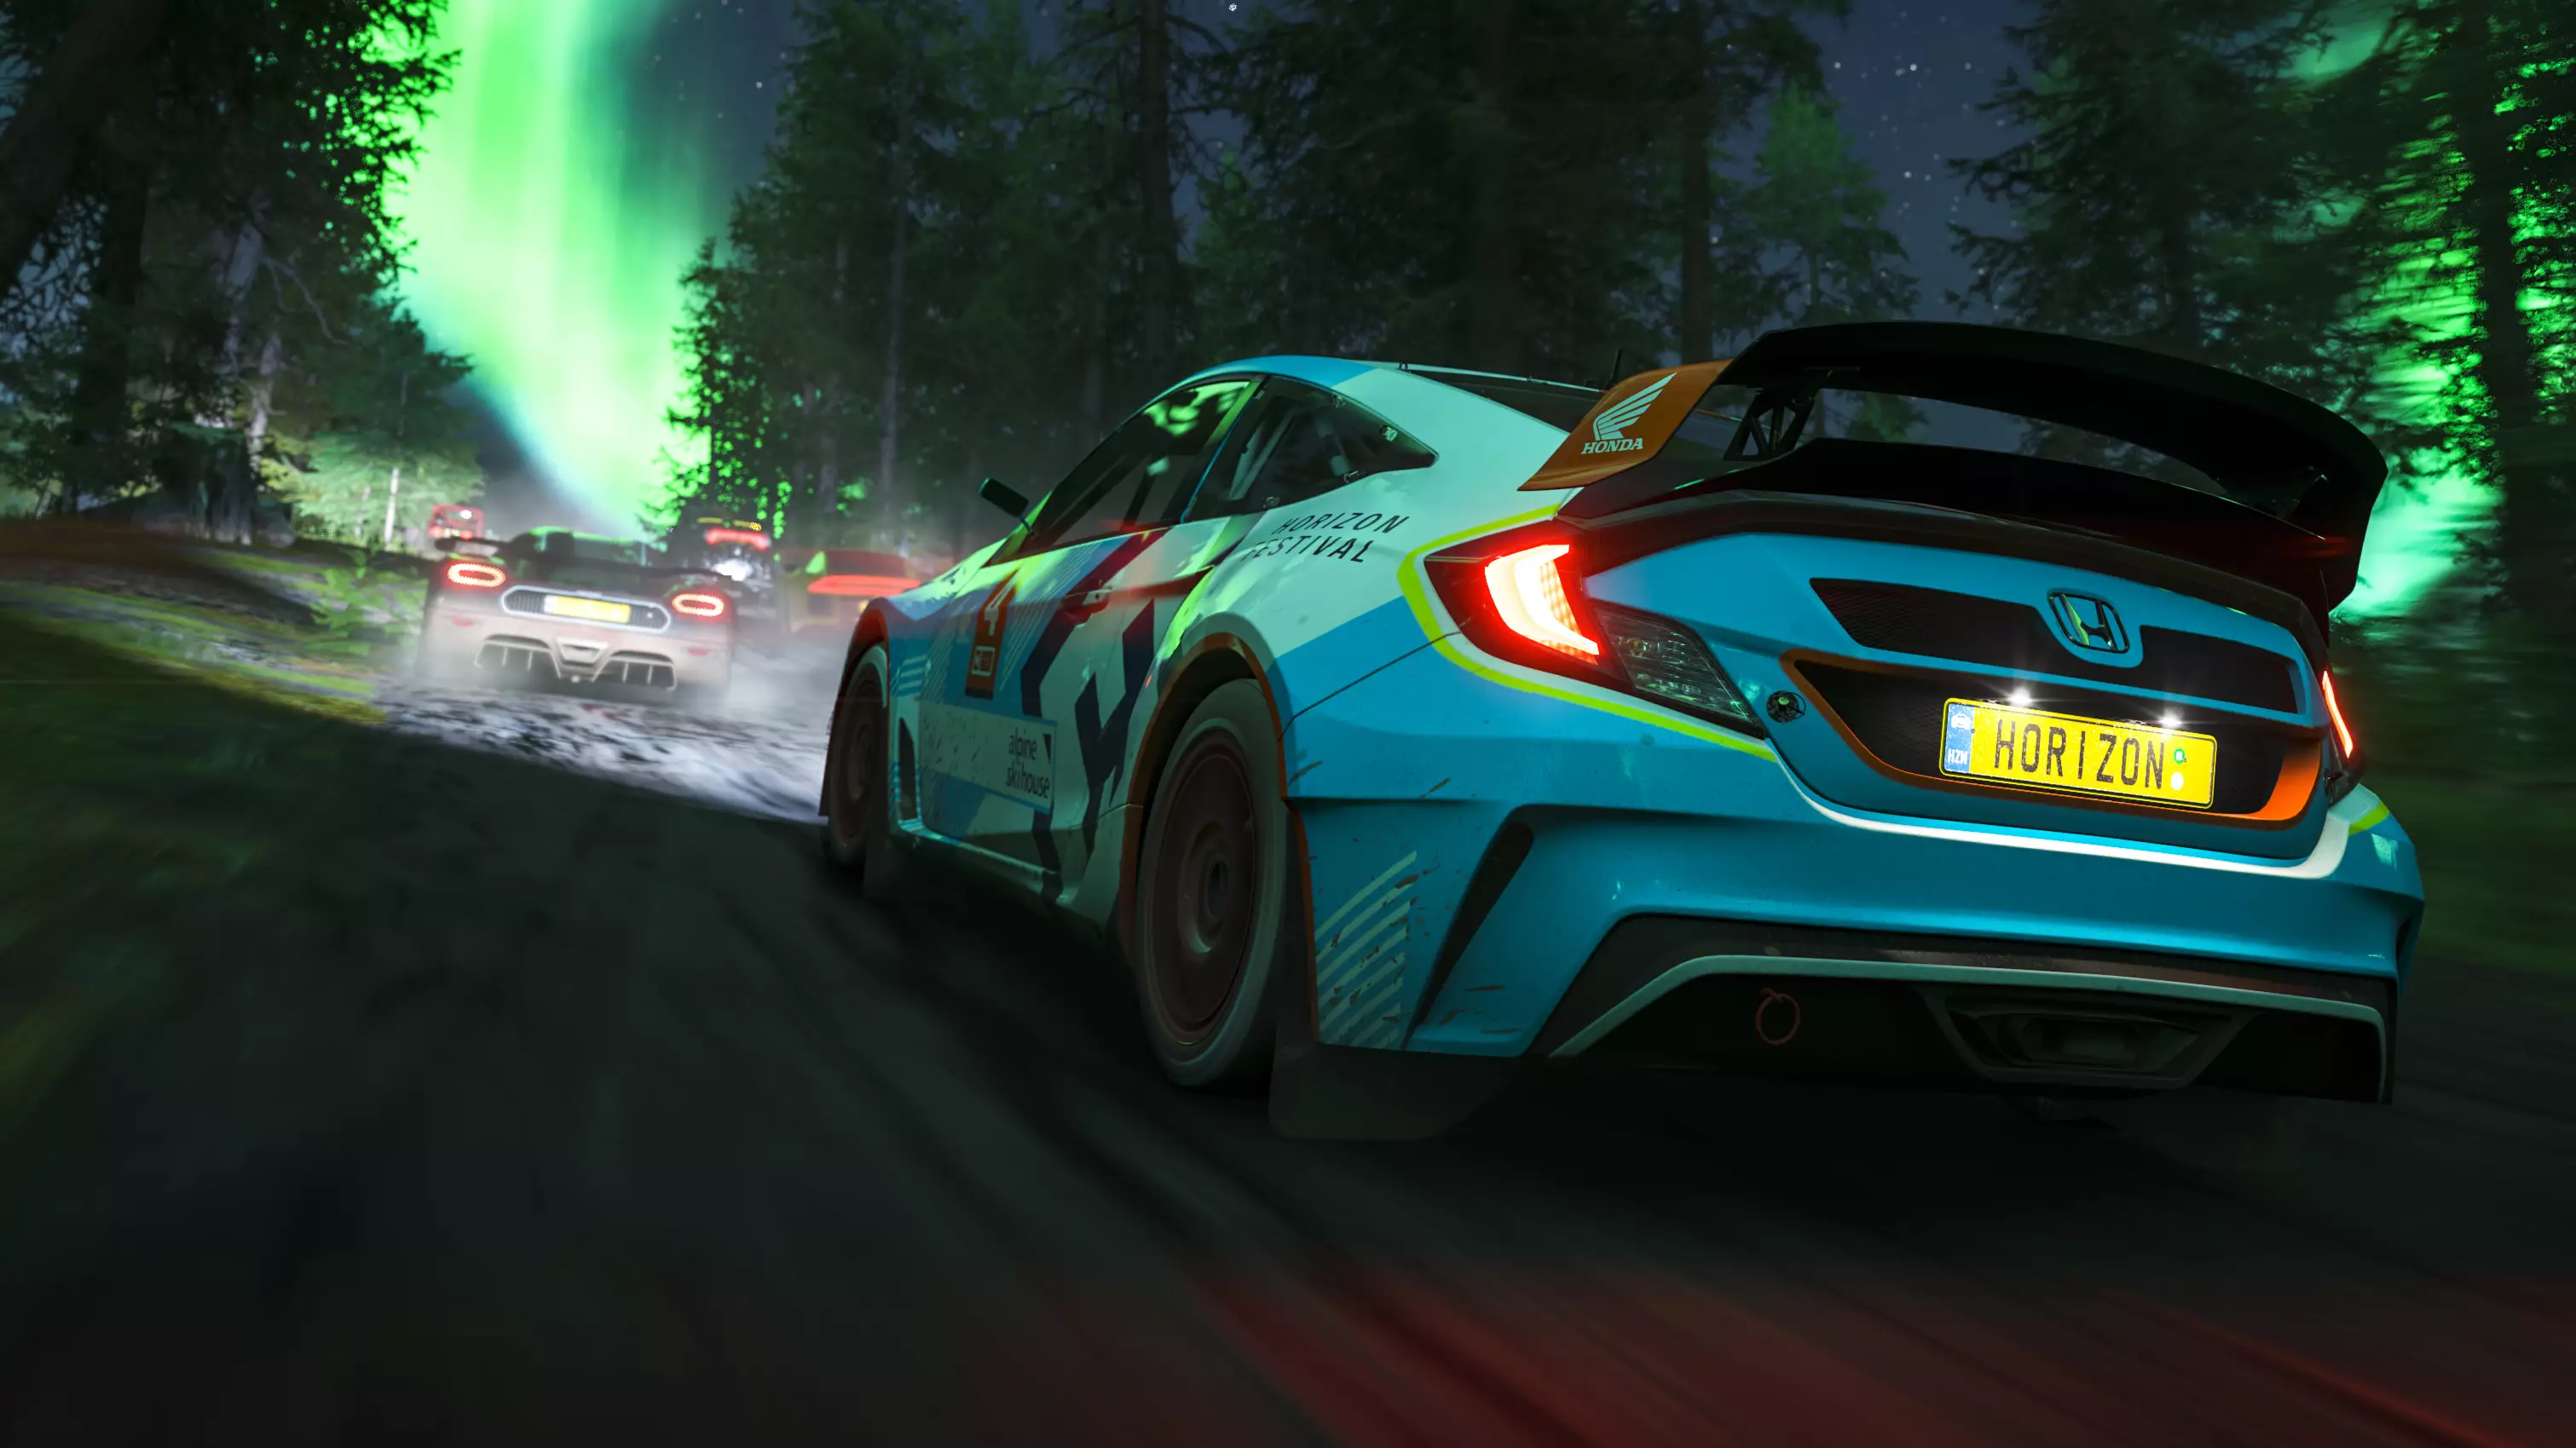 ‘Fortune Island’ Is An Expectedly Awesome Expansion To ‘Forza Horizon 4’